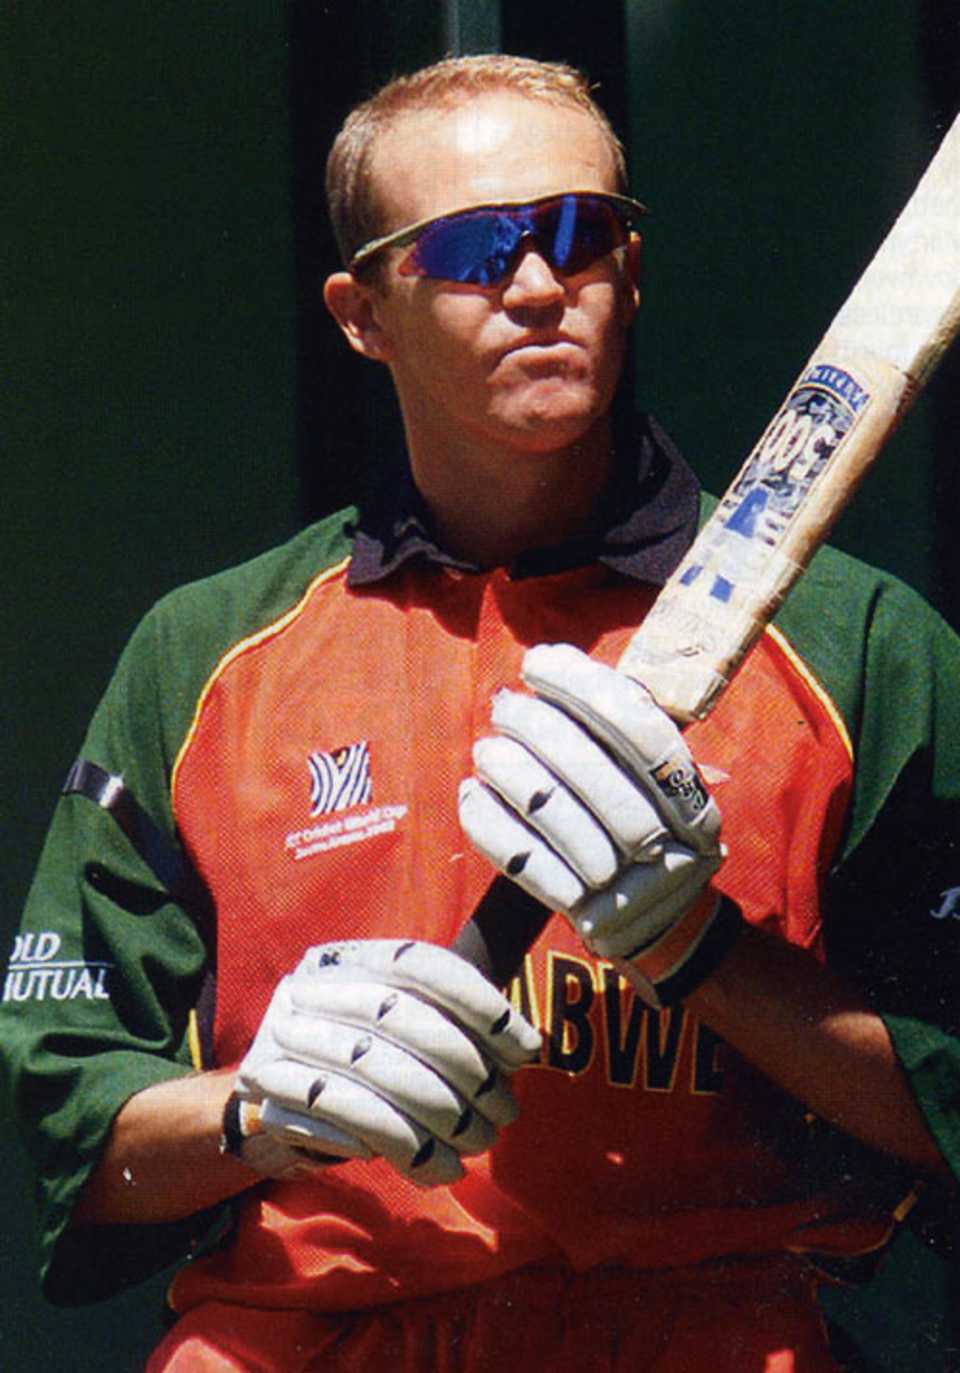 Andy Flower sporting his black armband